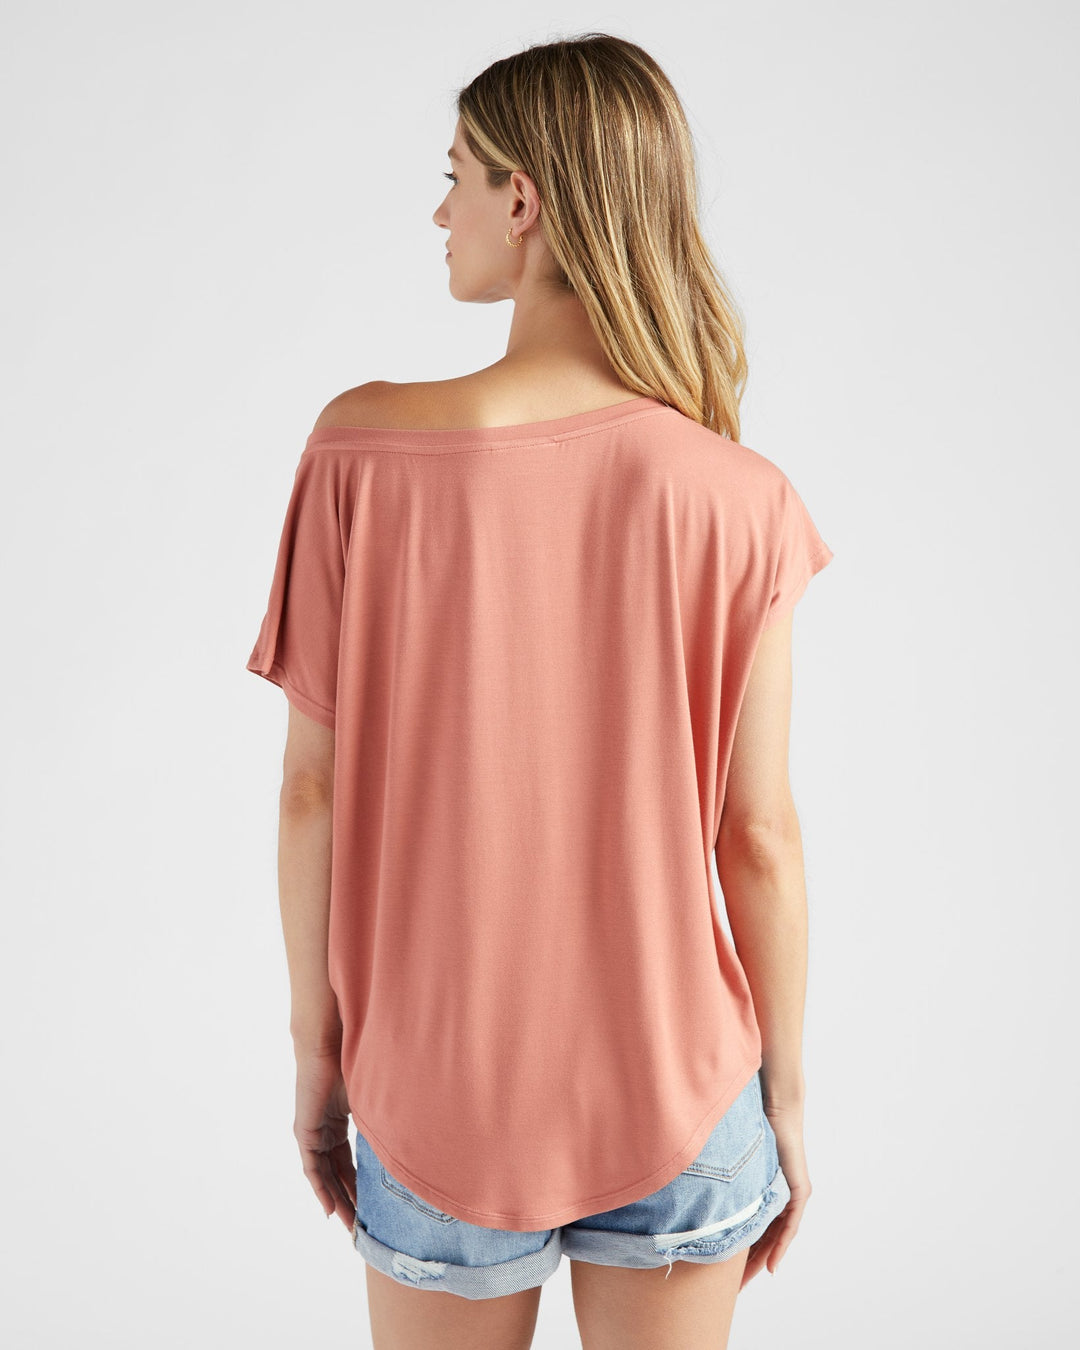 Peach Blossom $|& 78&SUNNY Edgewater Off The Shoulder Tee - SOF Back